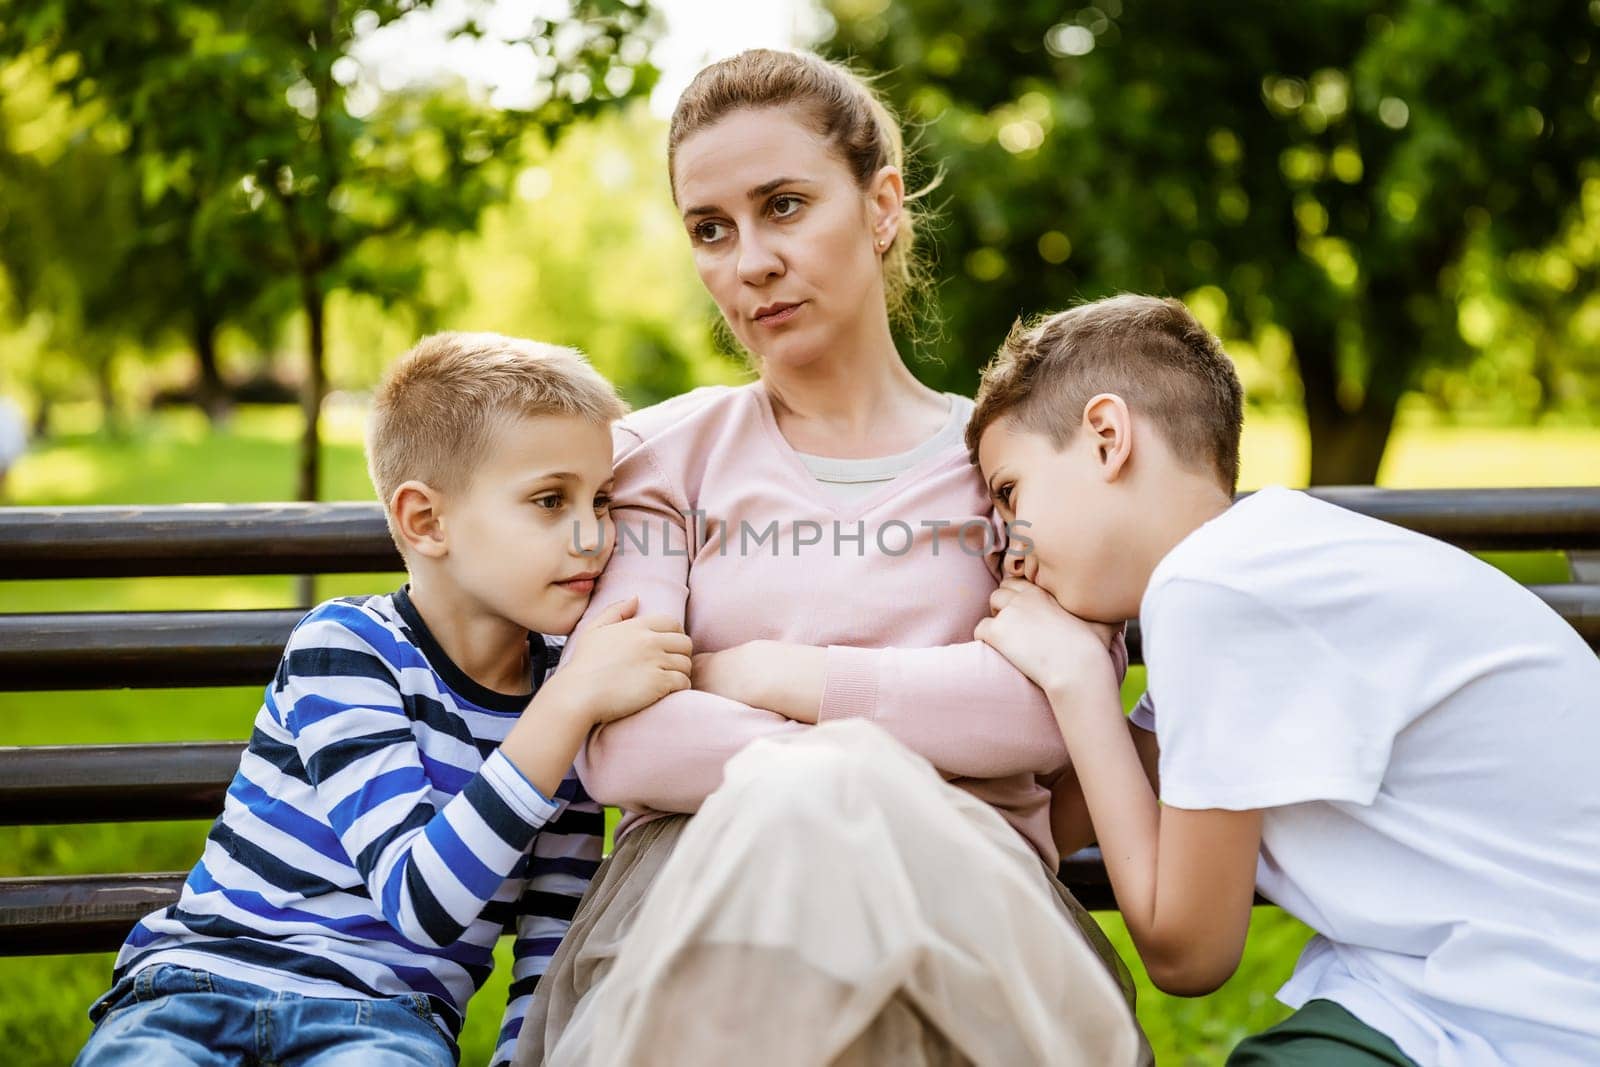 Mother is sitting with her sons on bench in park. She is angry and the boys try to apologize.